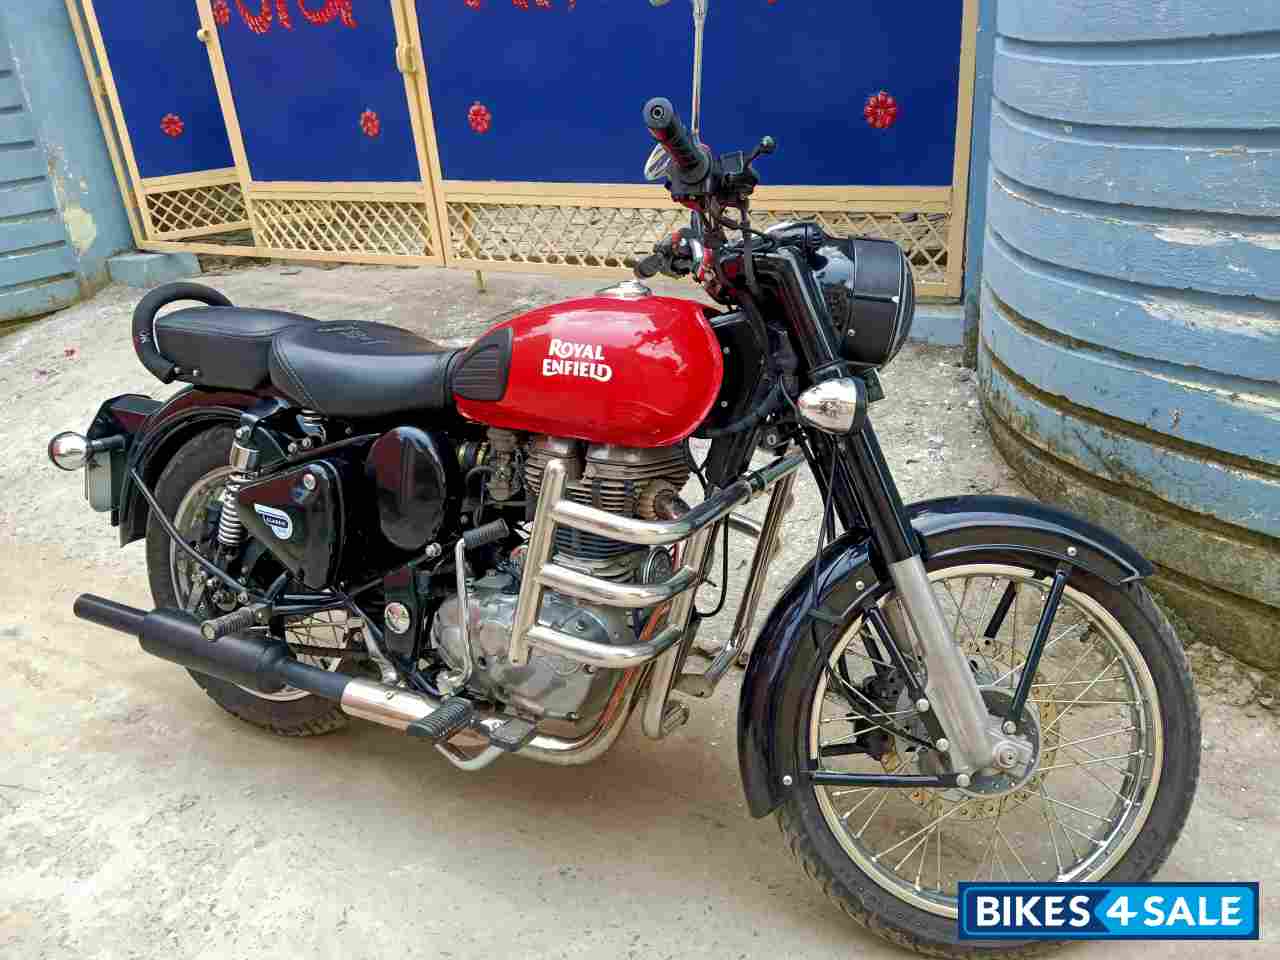 Used 2018 model Royal Enfield Classic 350 for sale in Sitamarhi 